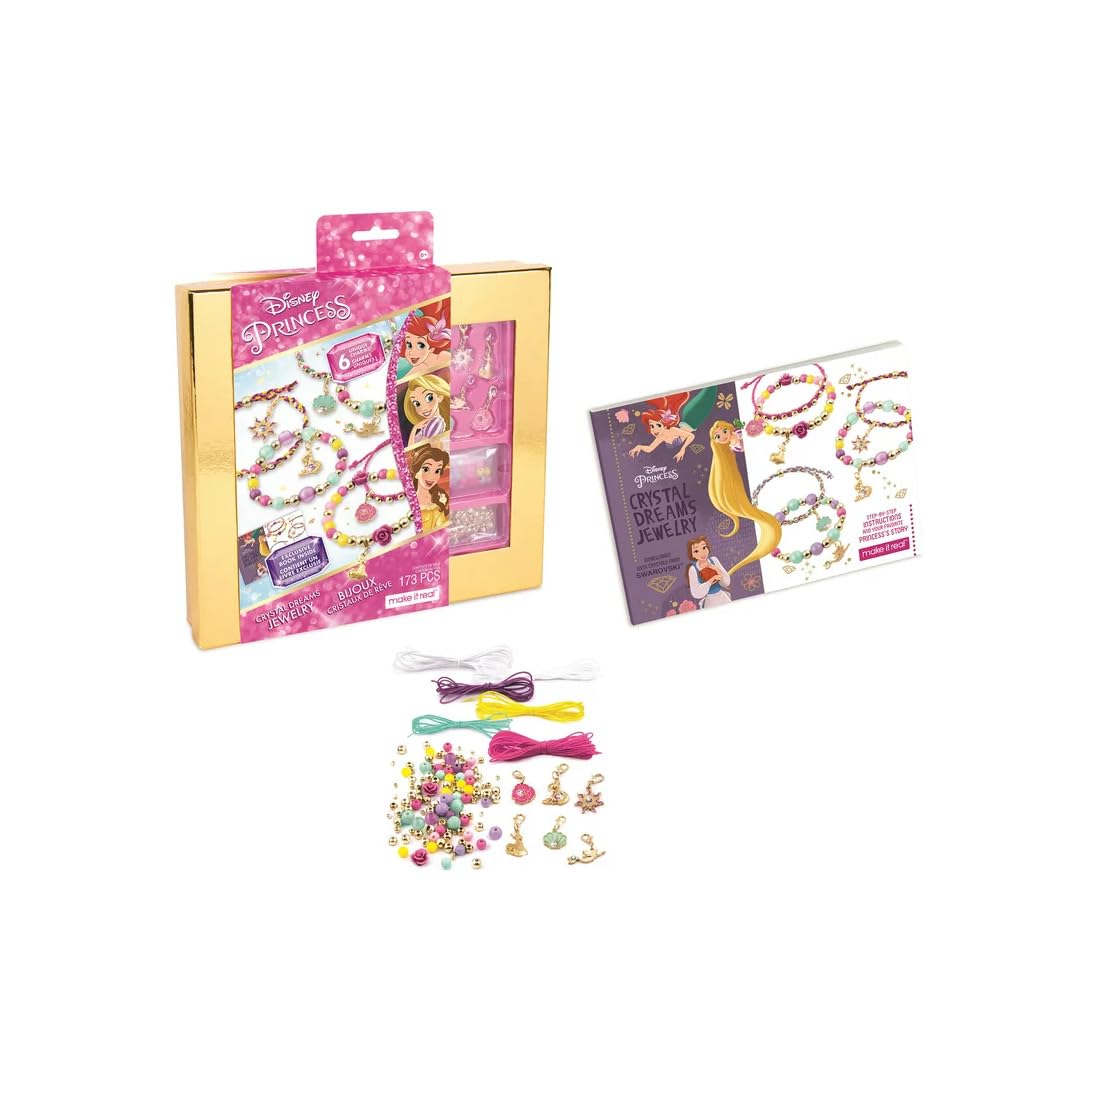 Make It Real - Disney Princess Crystal Dreams Jewelry - DIY Bead & Charm Bracelet Making Kit - Includes Jewelry Making Supplies, Charms with Swarovski Crystals & Exclusive Disney Princess Book